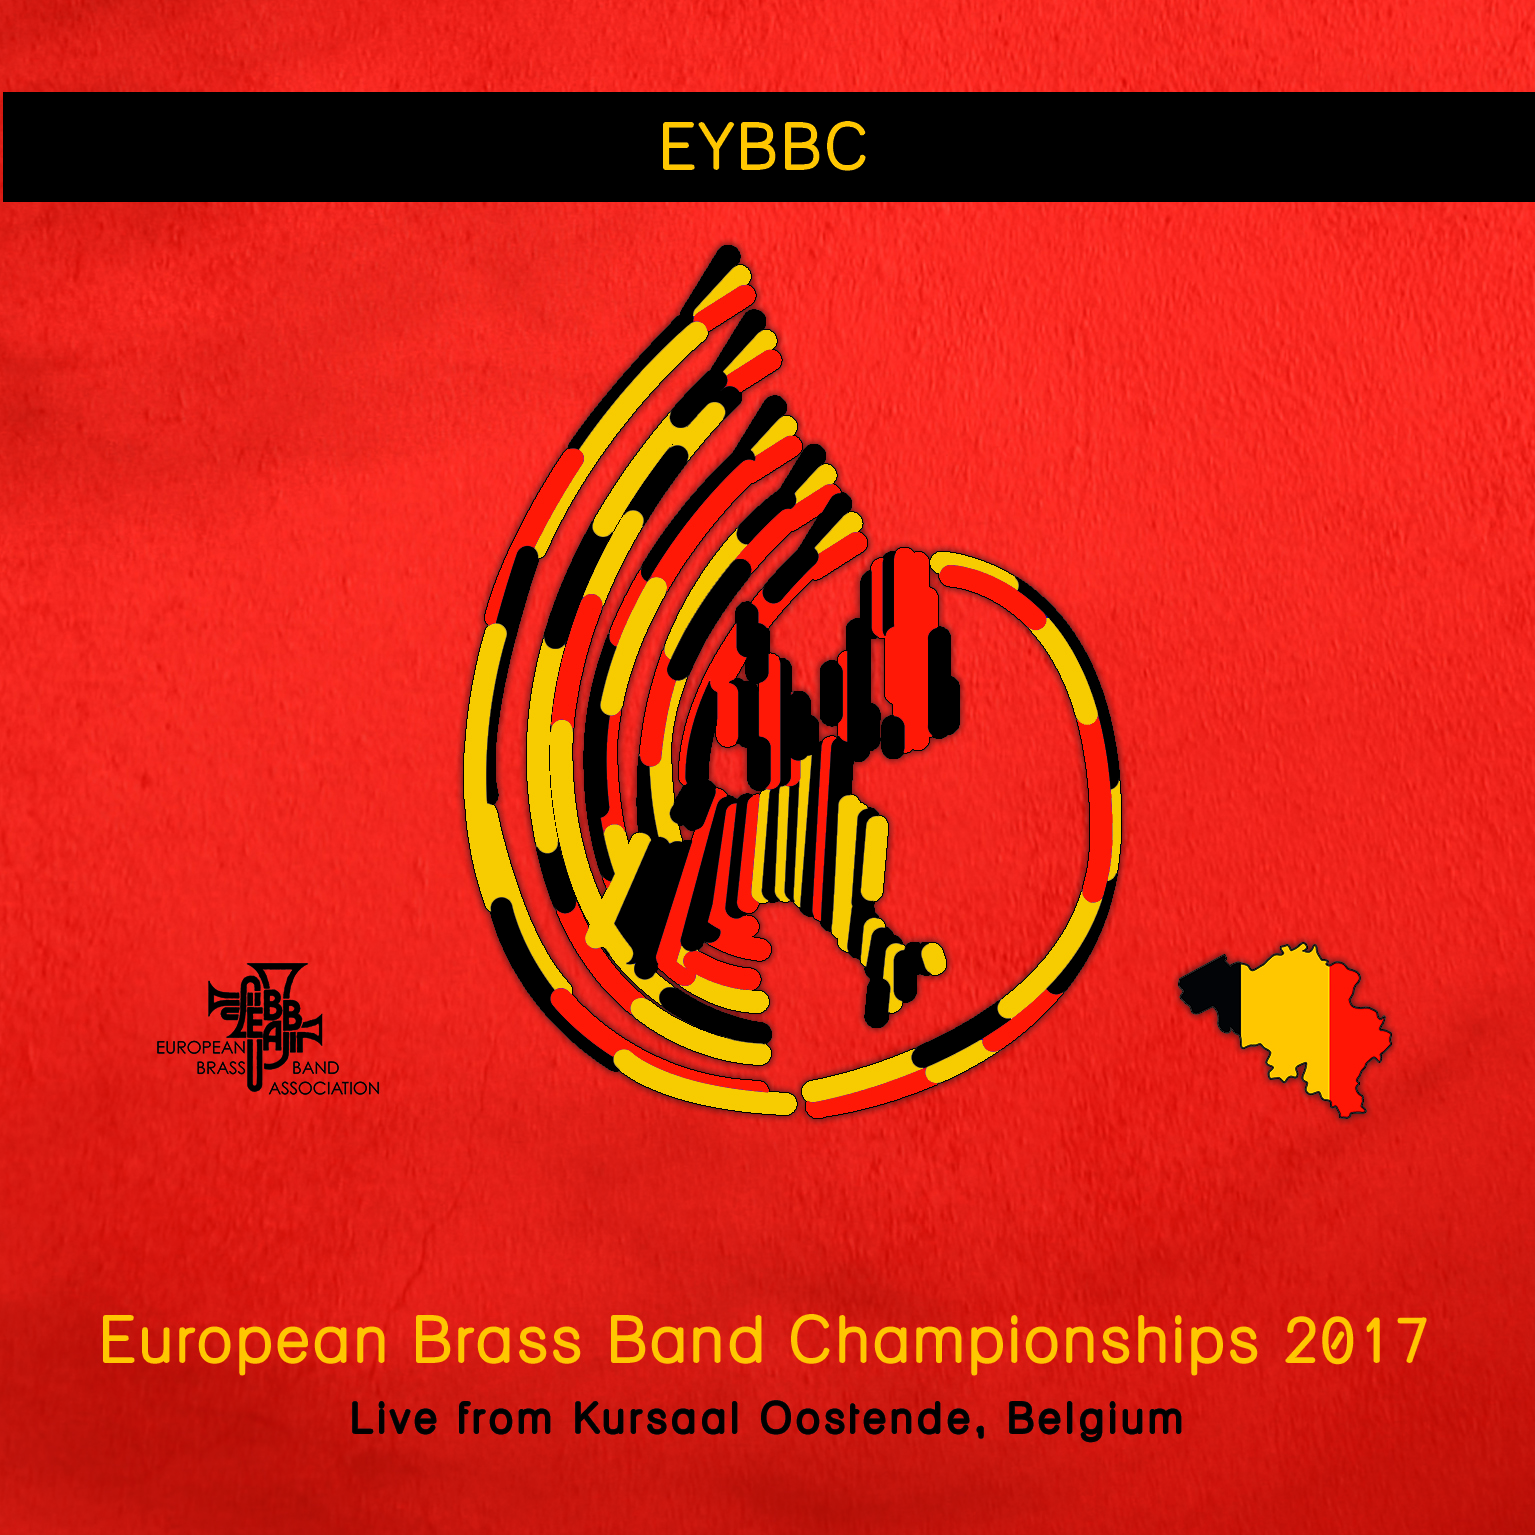 European Brass Band Championships 2017 - Youth Brass Band Contest - Download